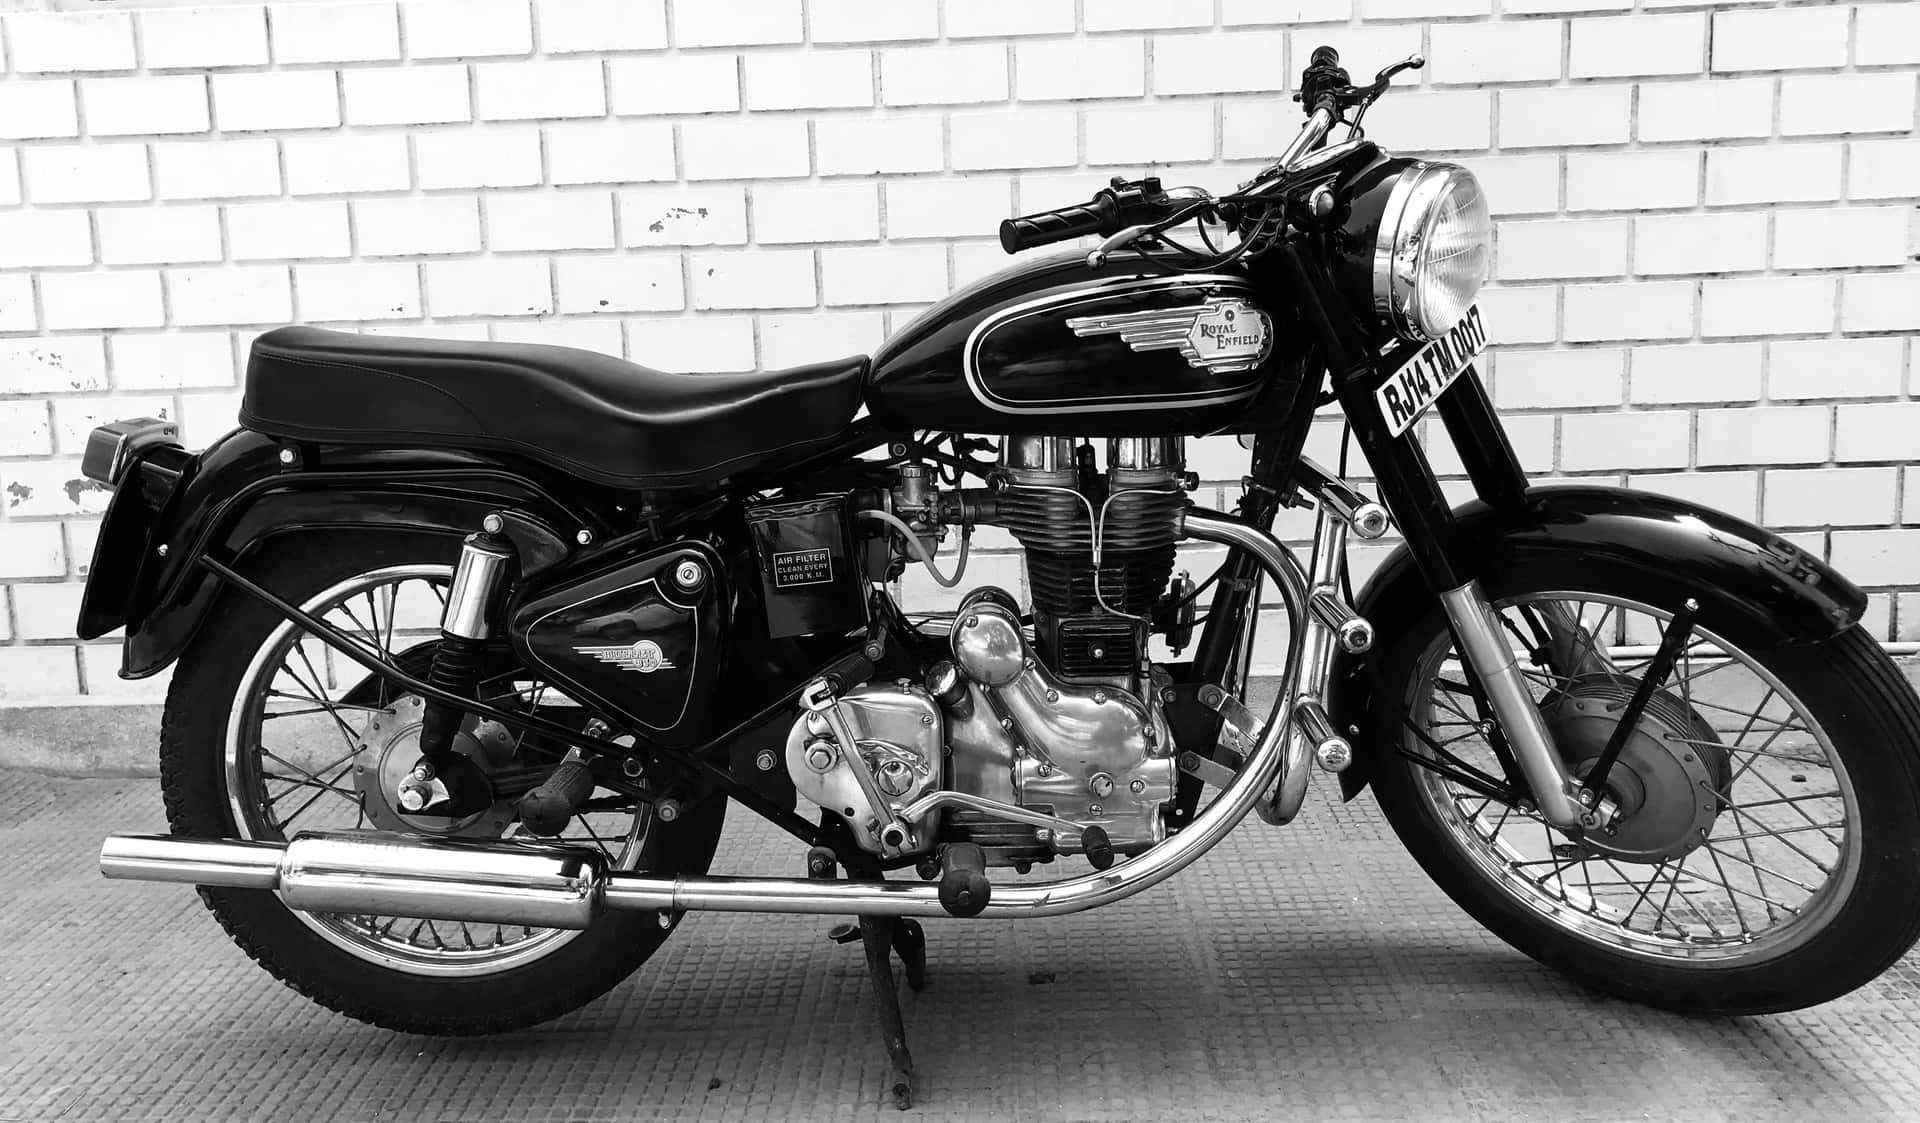 A Black And White Photo Of A Motorcycle Parked In Front Of A Brick Wall